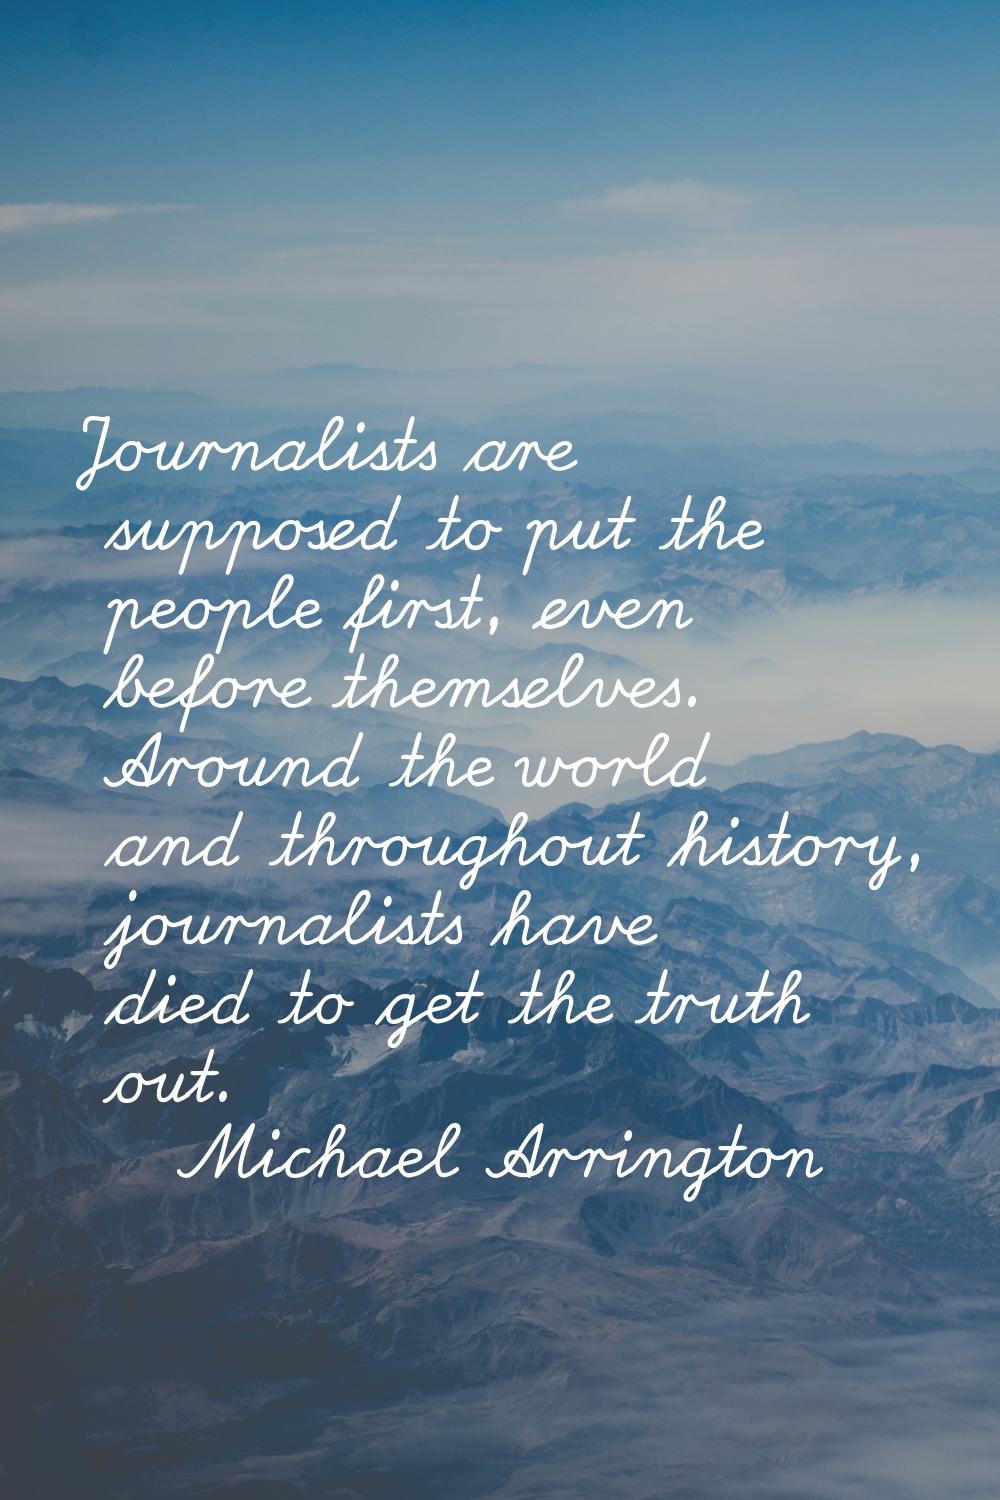 Journalists are supposed to put the people first, even before themselves. Around the world and thro